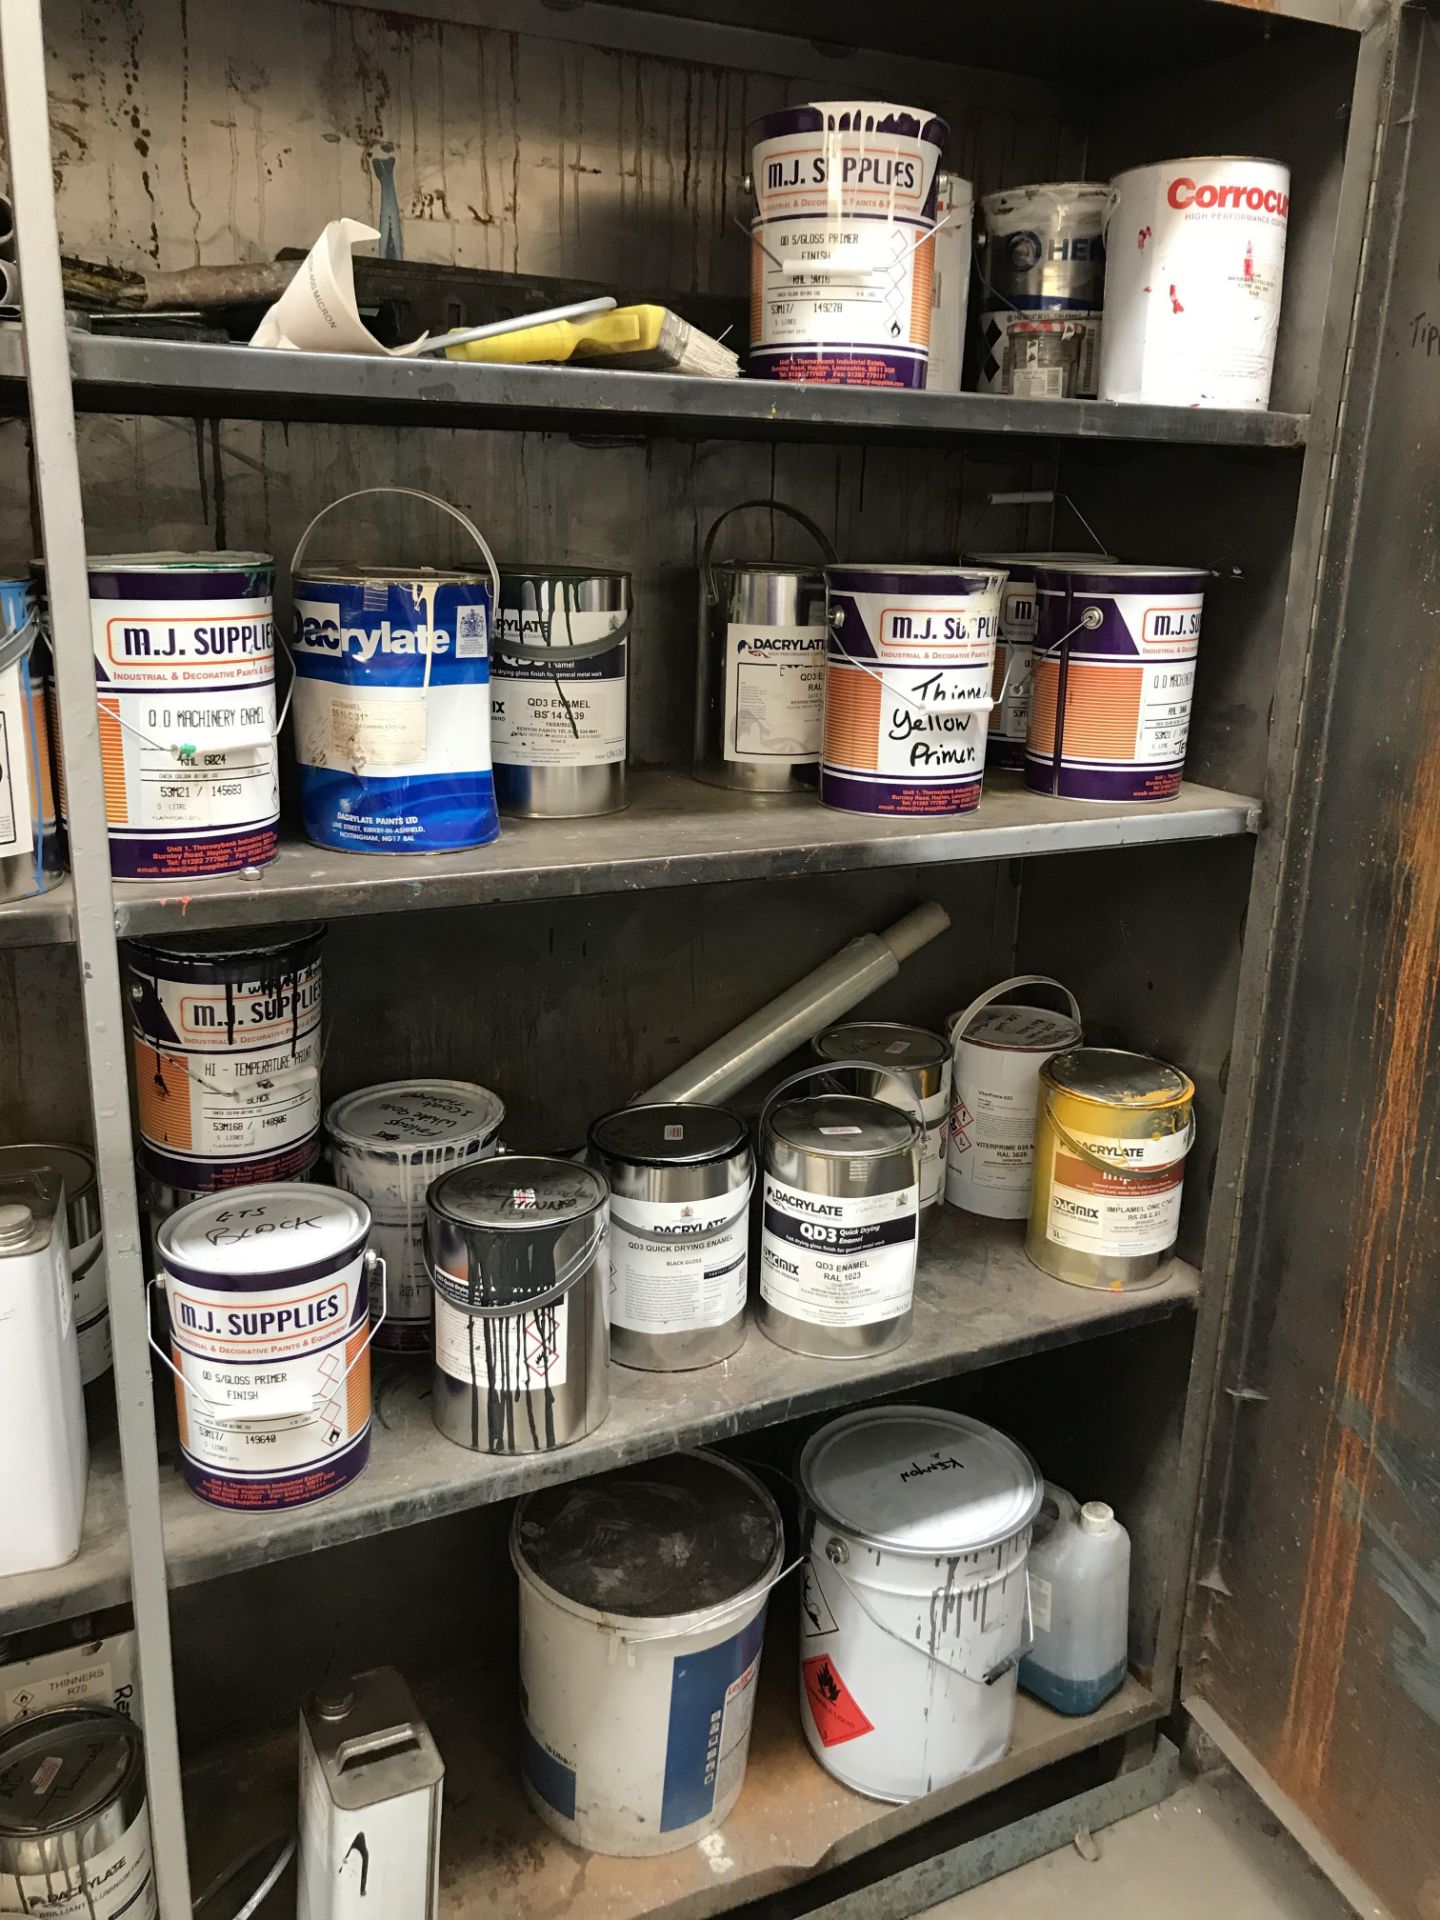 A Quantity of Paints, Primers and Thinners with Heavy Duty Welded Steel Inflammables Cabinet, 96in w - Image 4 of 4